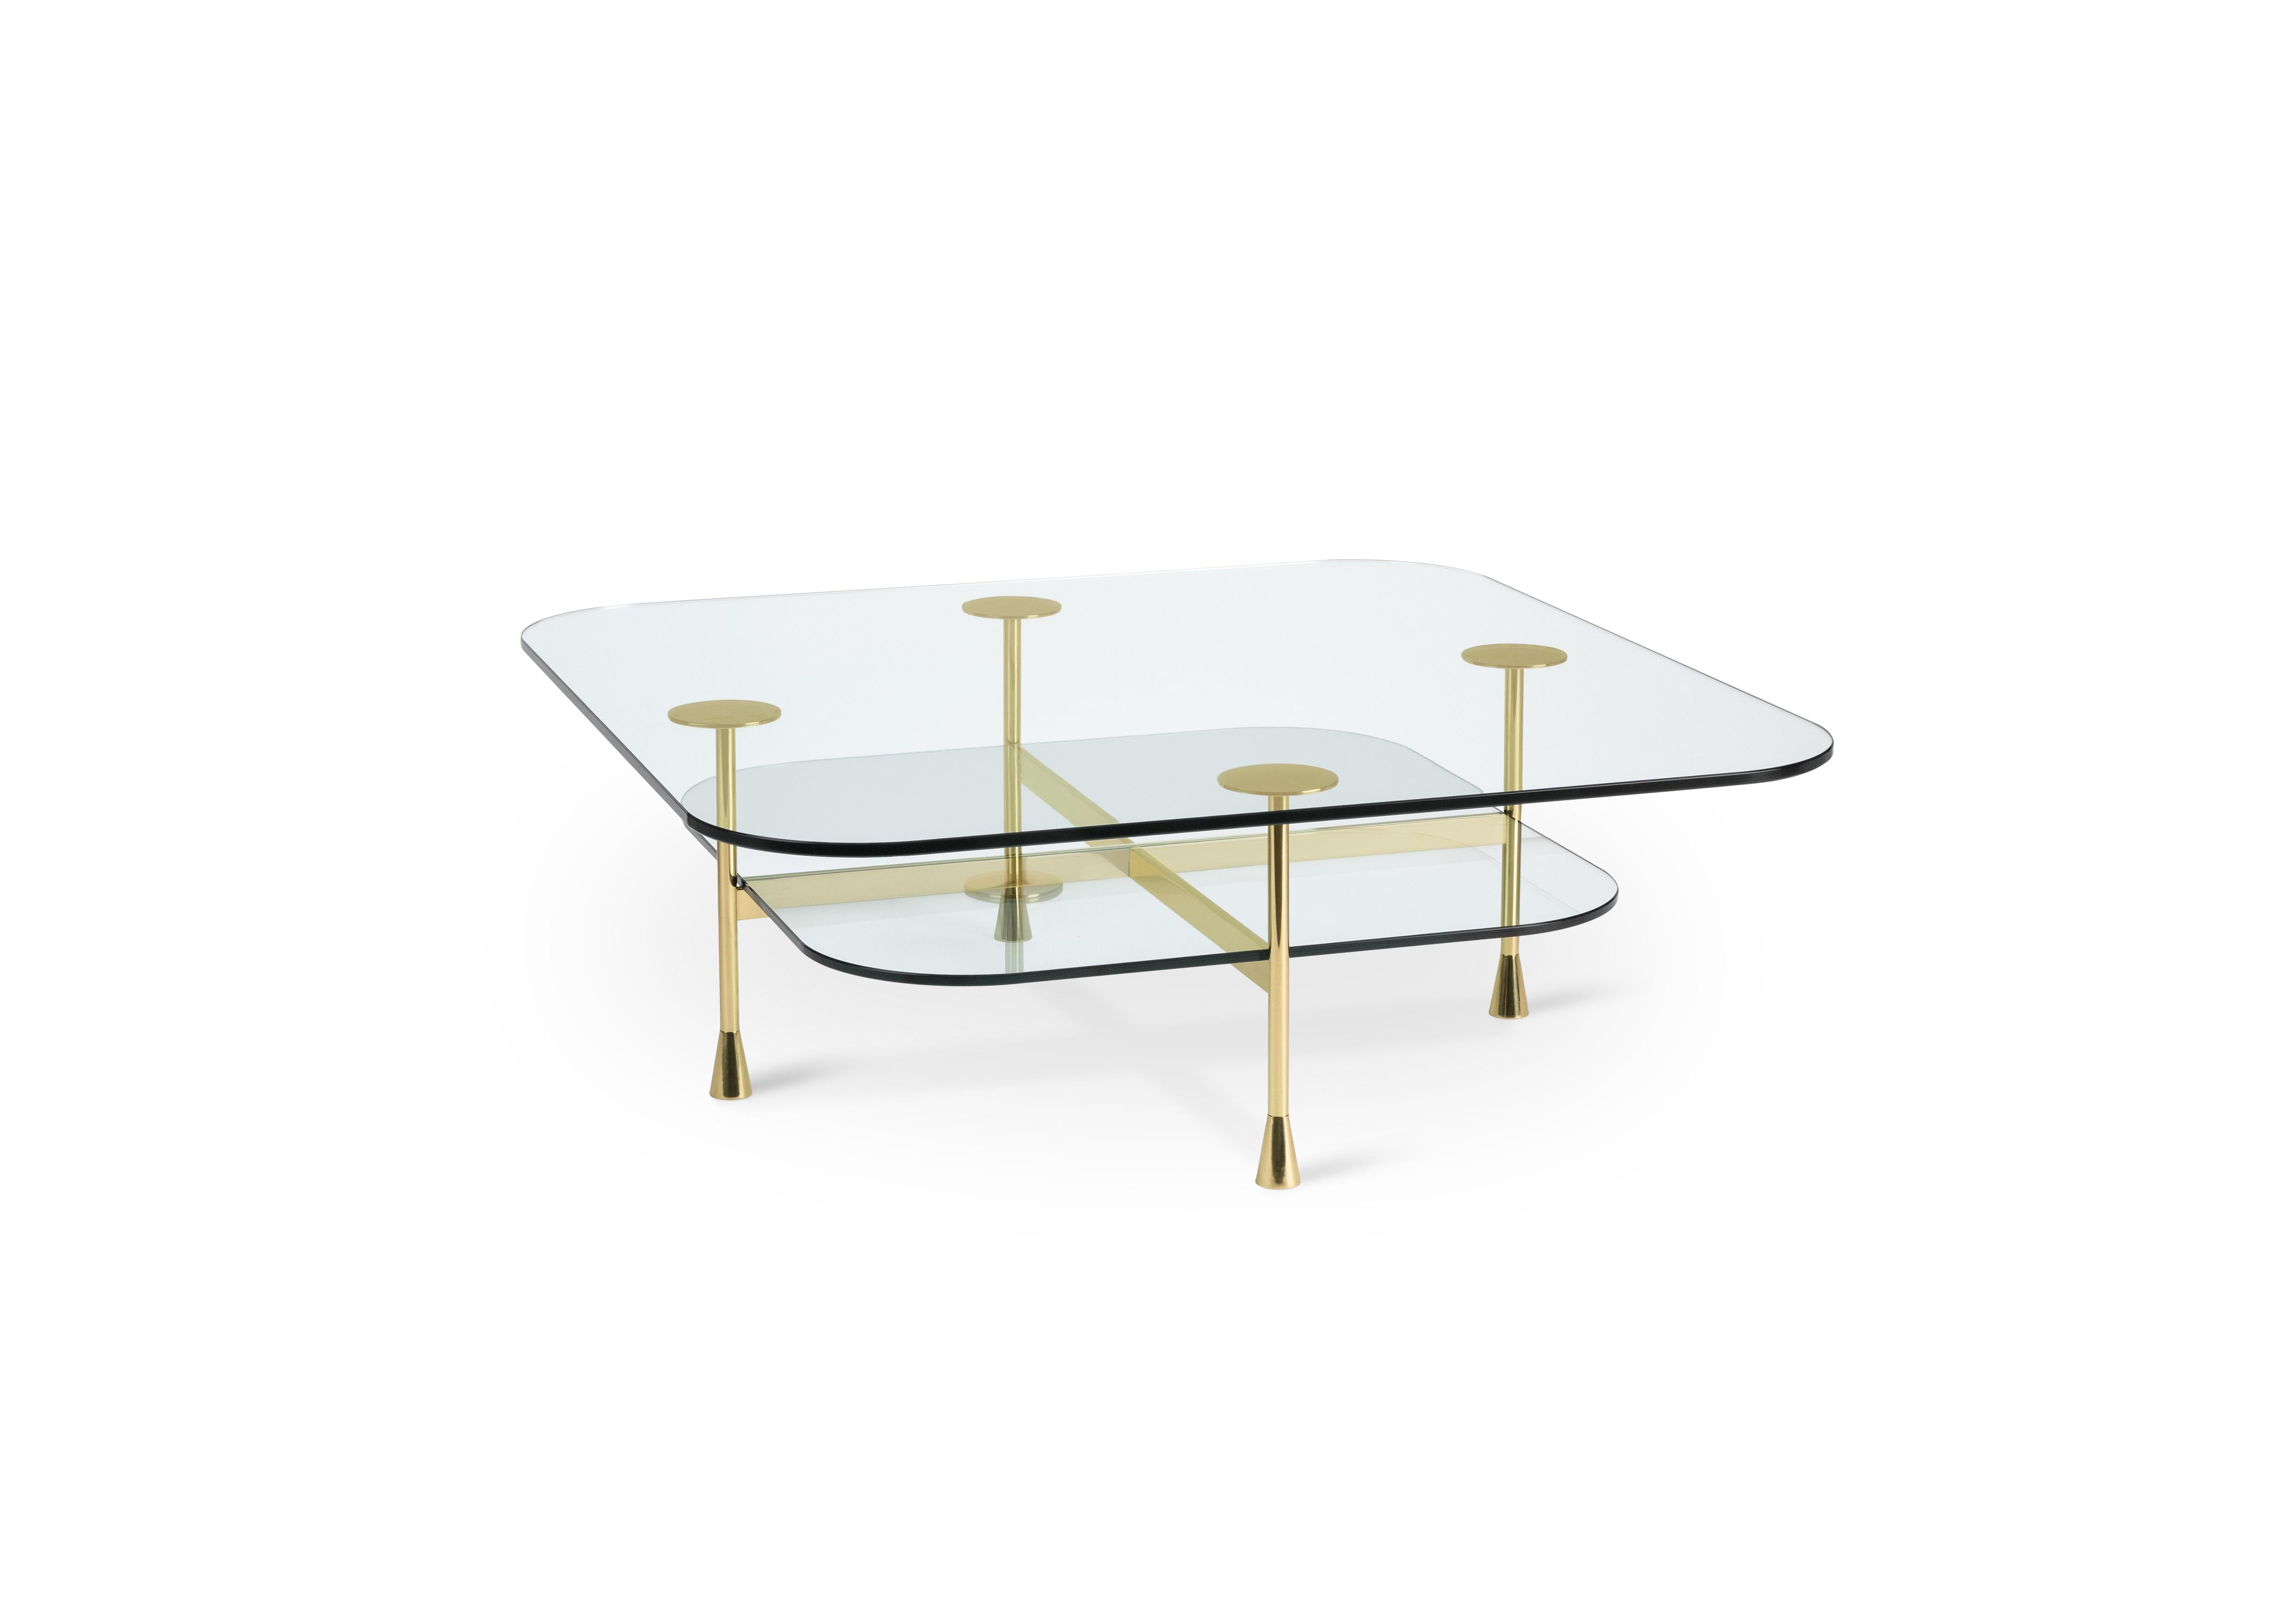 Side table in crystal and brass
The Vitruvian man and the idea of the human body perfection: this is how the designer sees this central coffee table shaped perfectly with the squared and round shape. The glass, in the double overlapping layer,